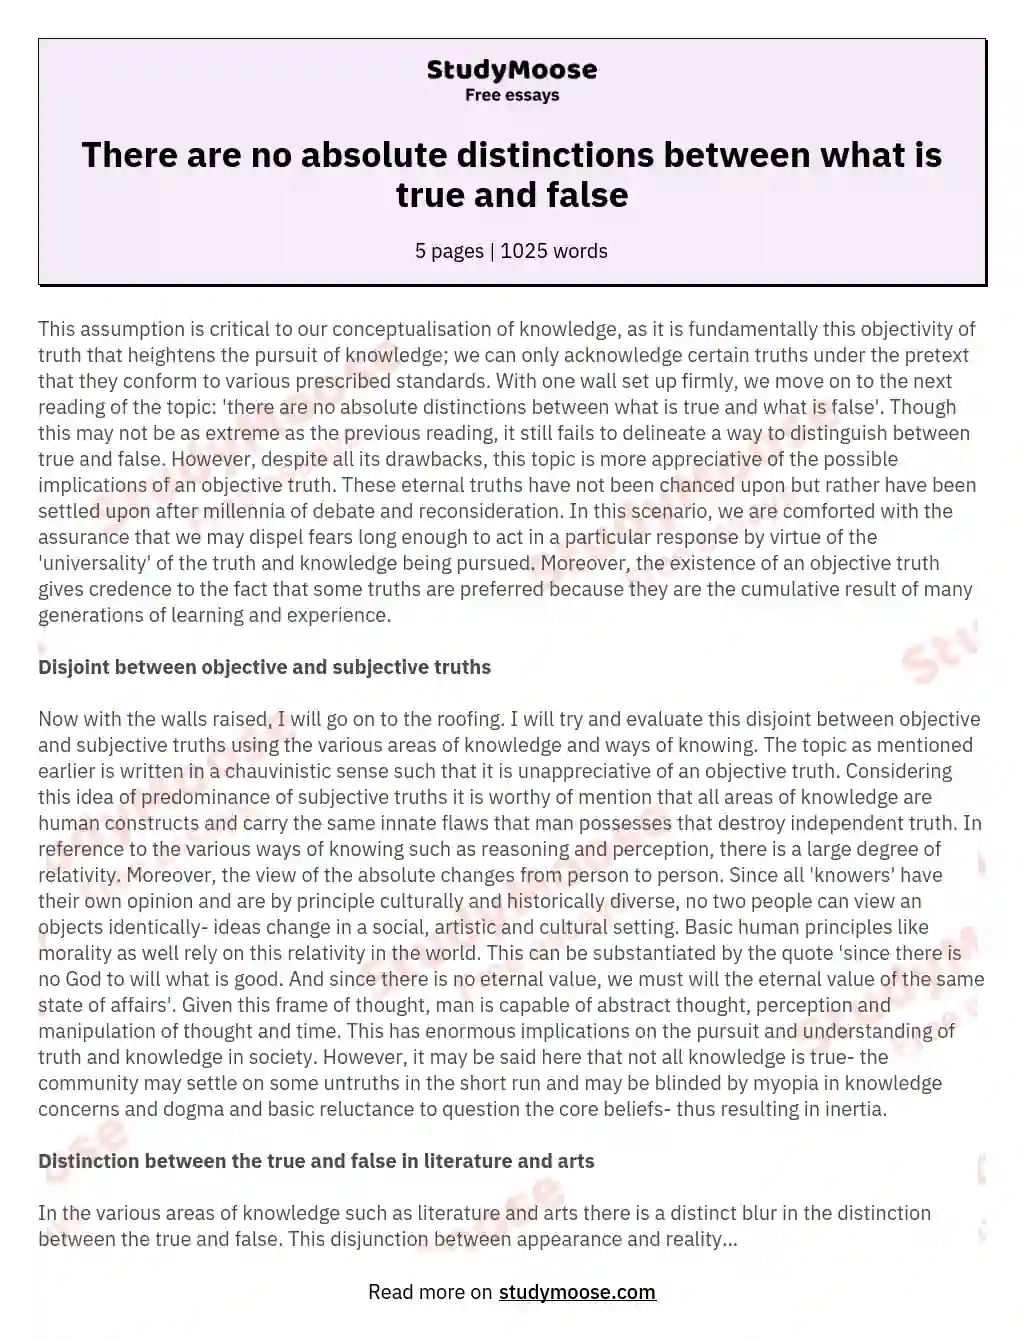 There are no absolute distinctions between what is true and false essay